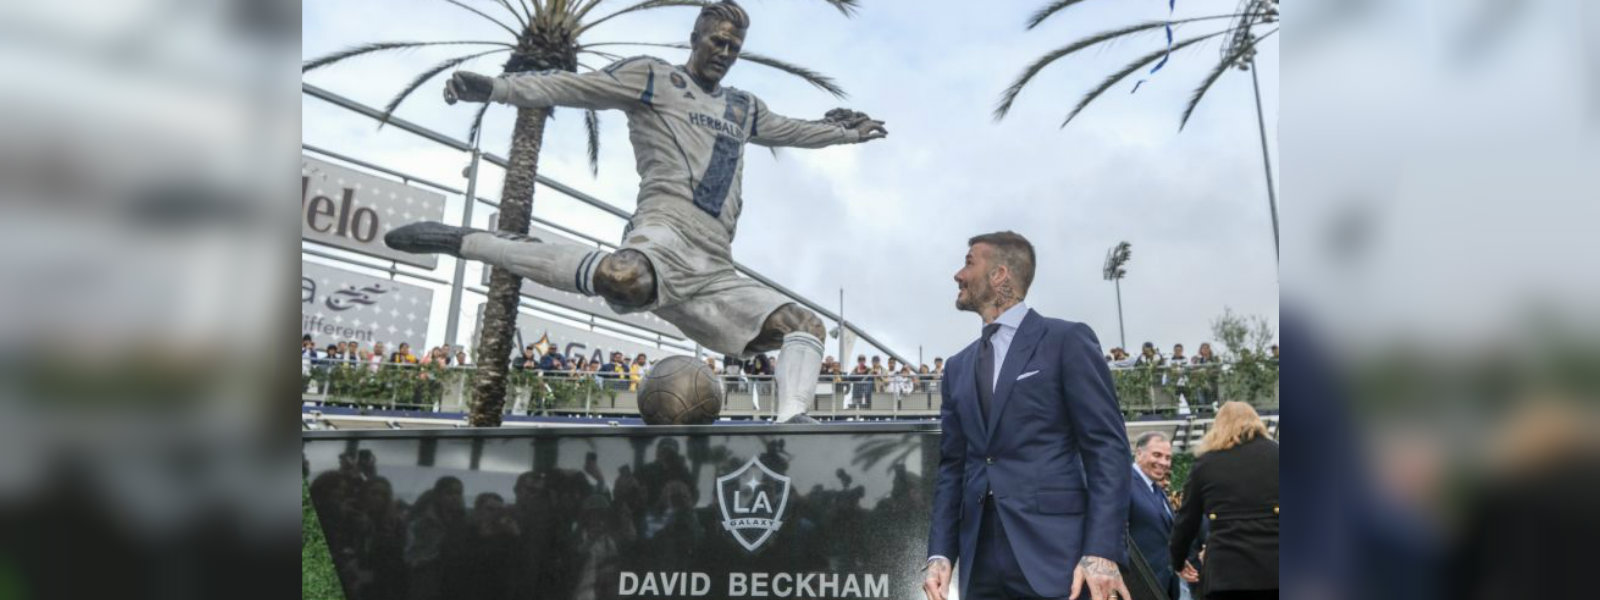 Galaxy unveil statue to honor Beckham